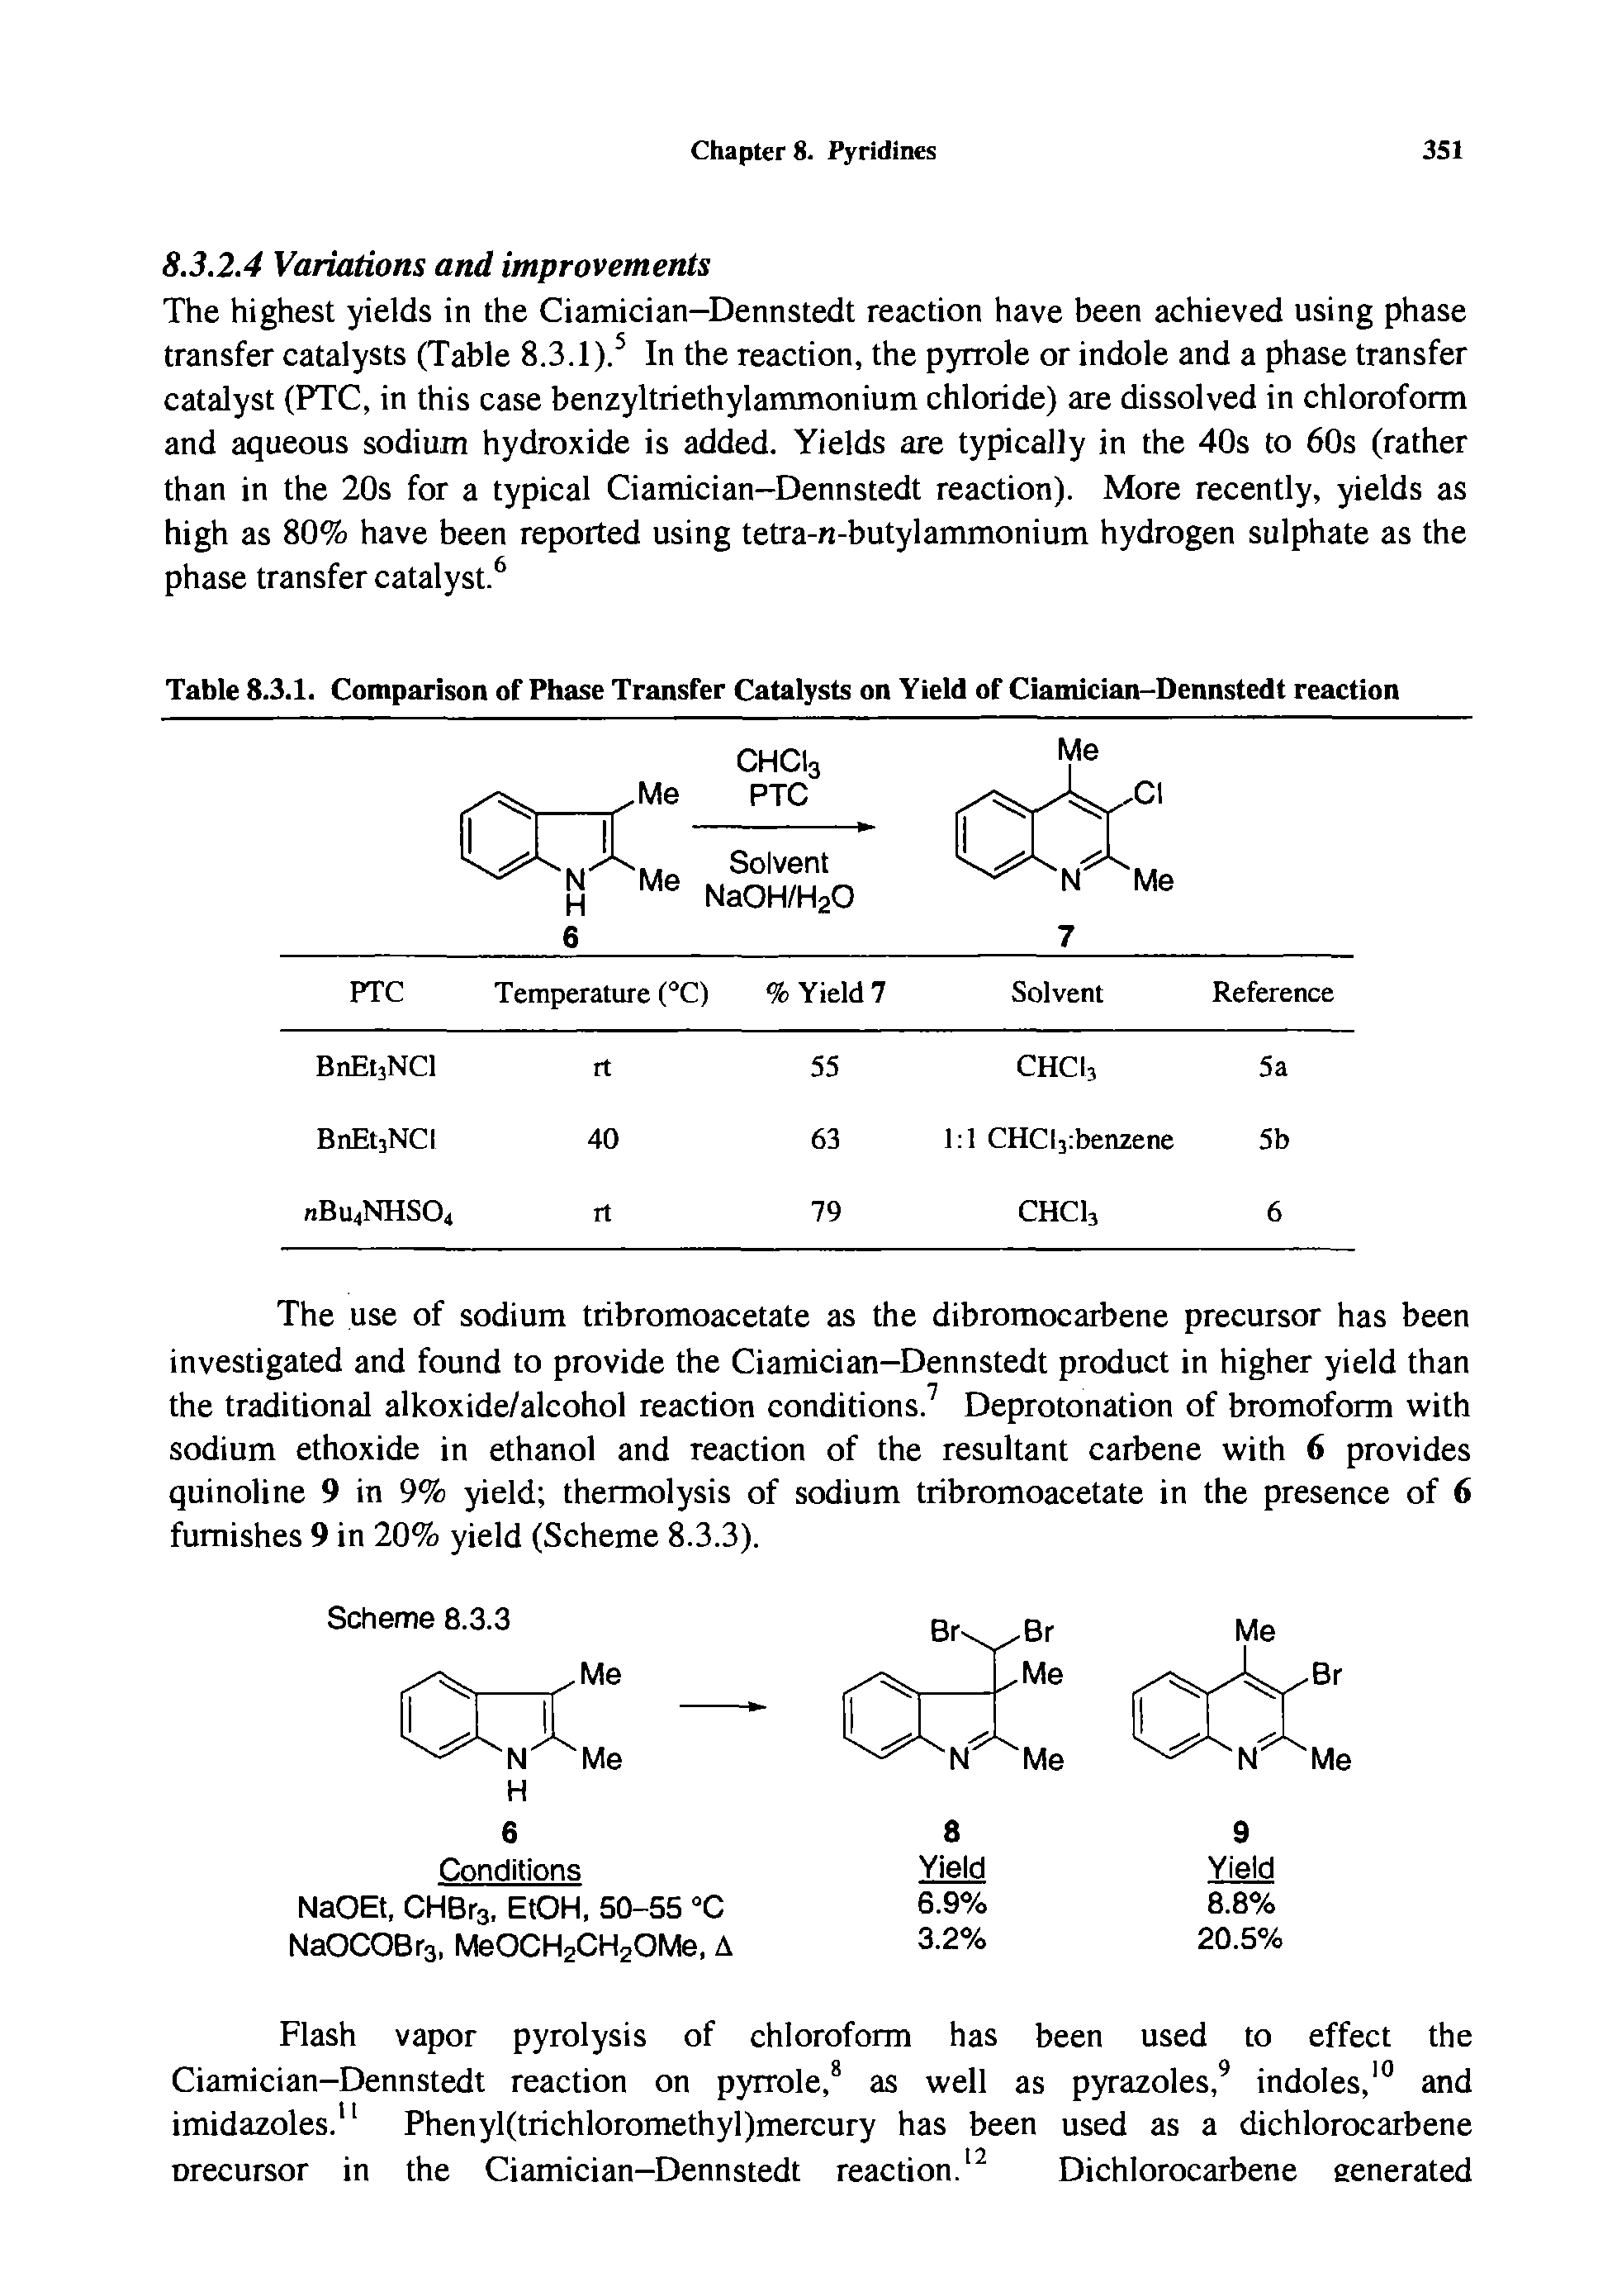 Table 8.3.1. Comparison of Phase Transfer Catalysts on Yield of Ciamician-Dennstedt reaction...